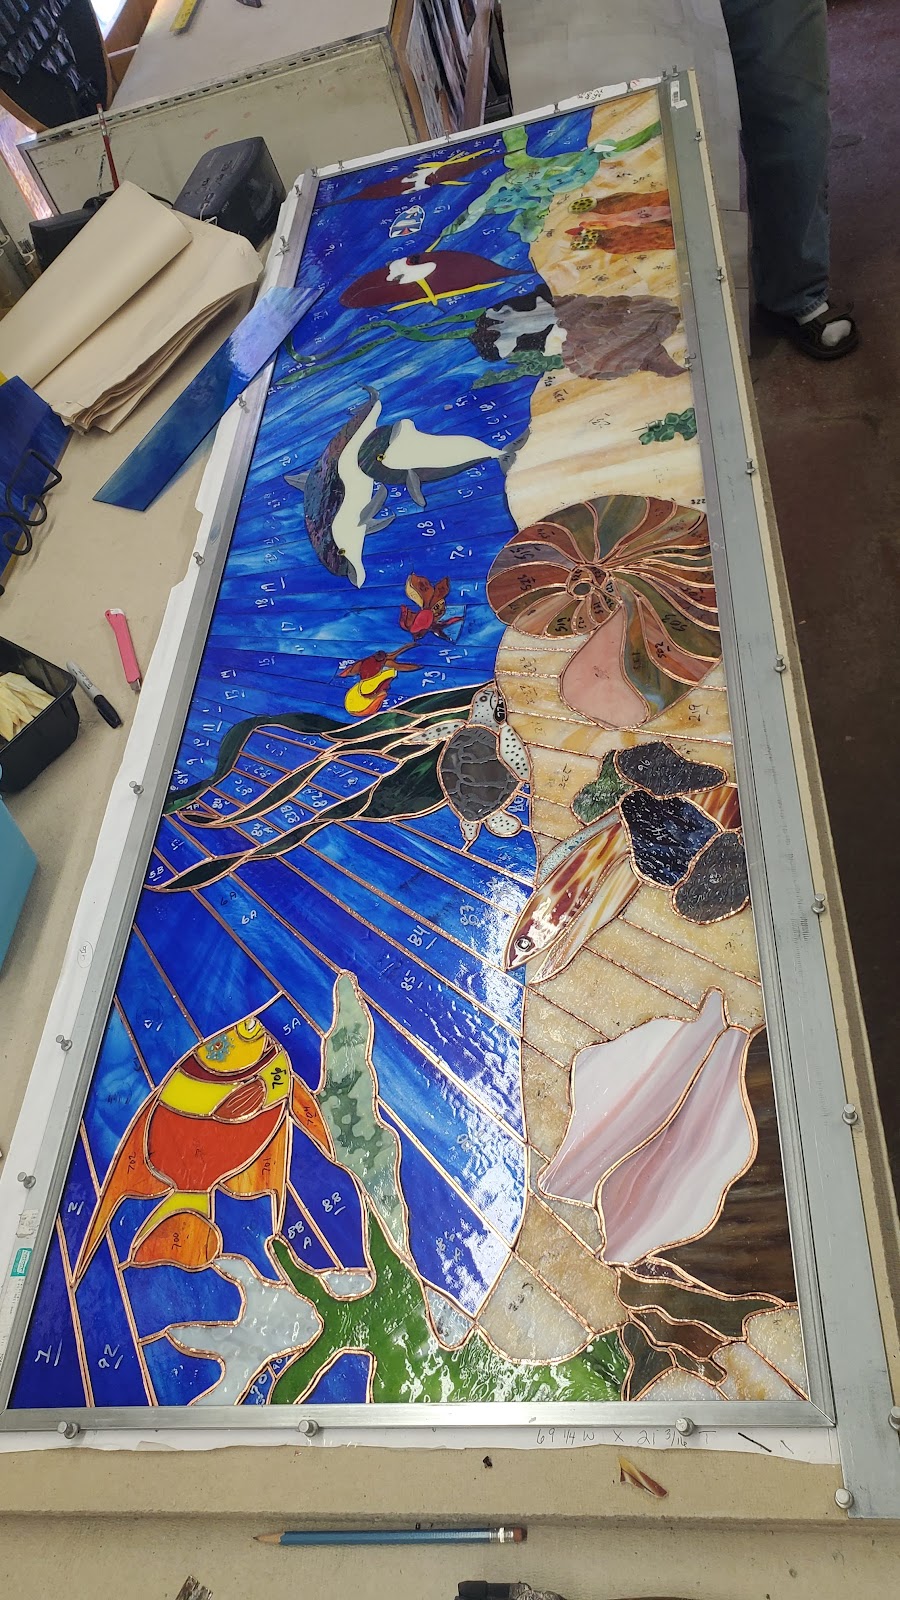 Class Glass Stained Glass Supplies | 541250 US-1, Callahan, FL 32011, USA | Phone: (904) 879-1847